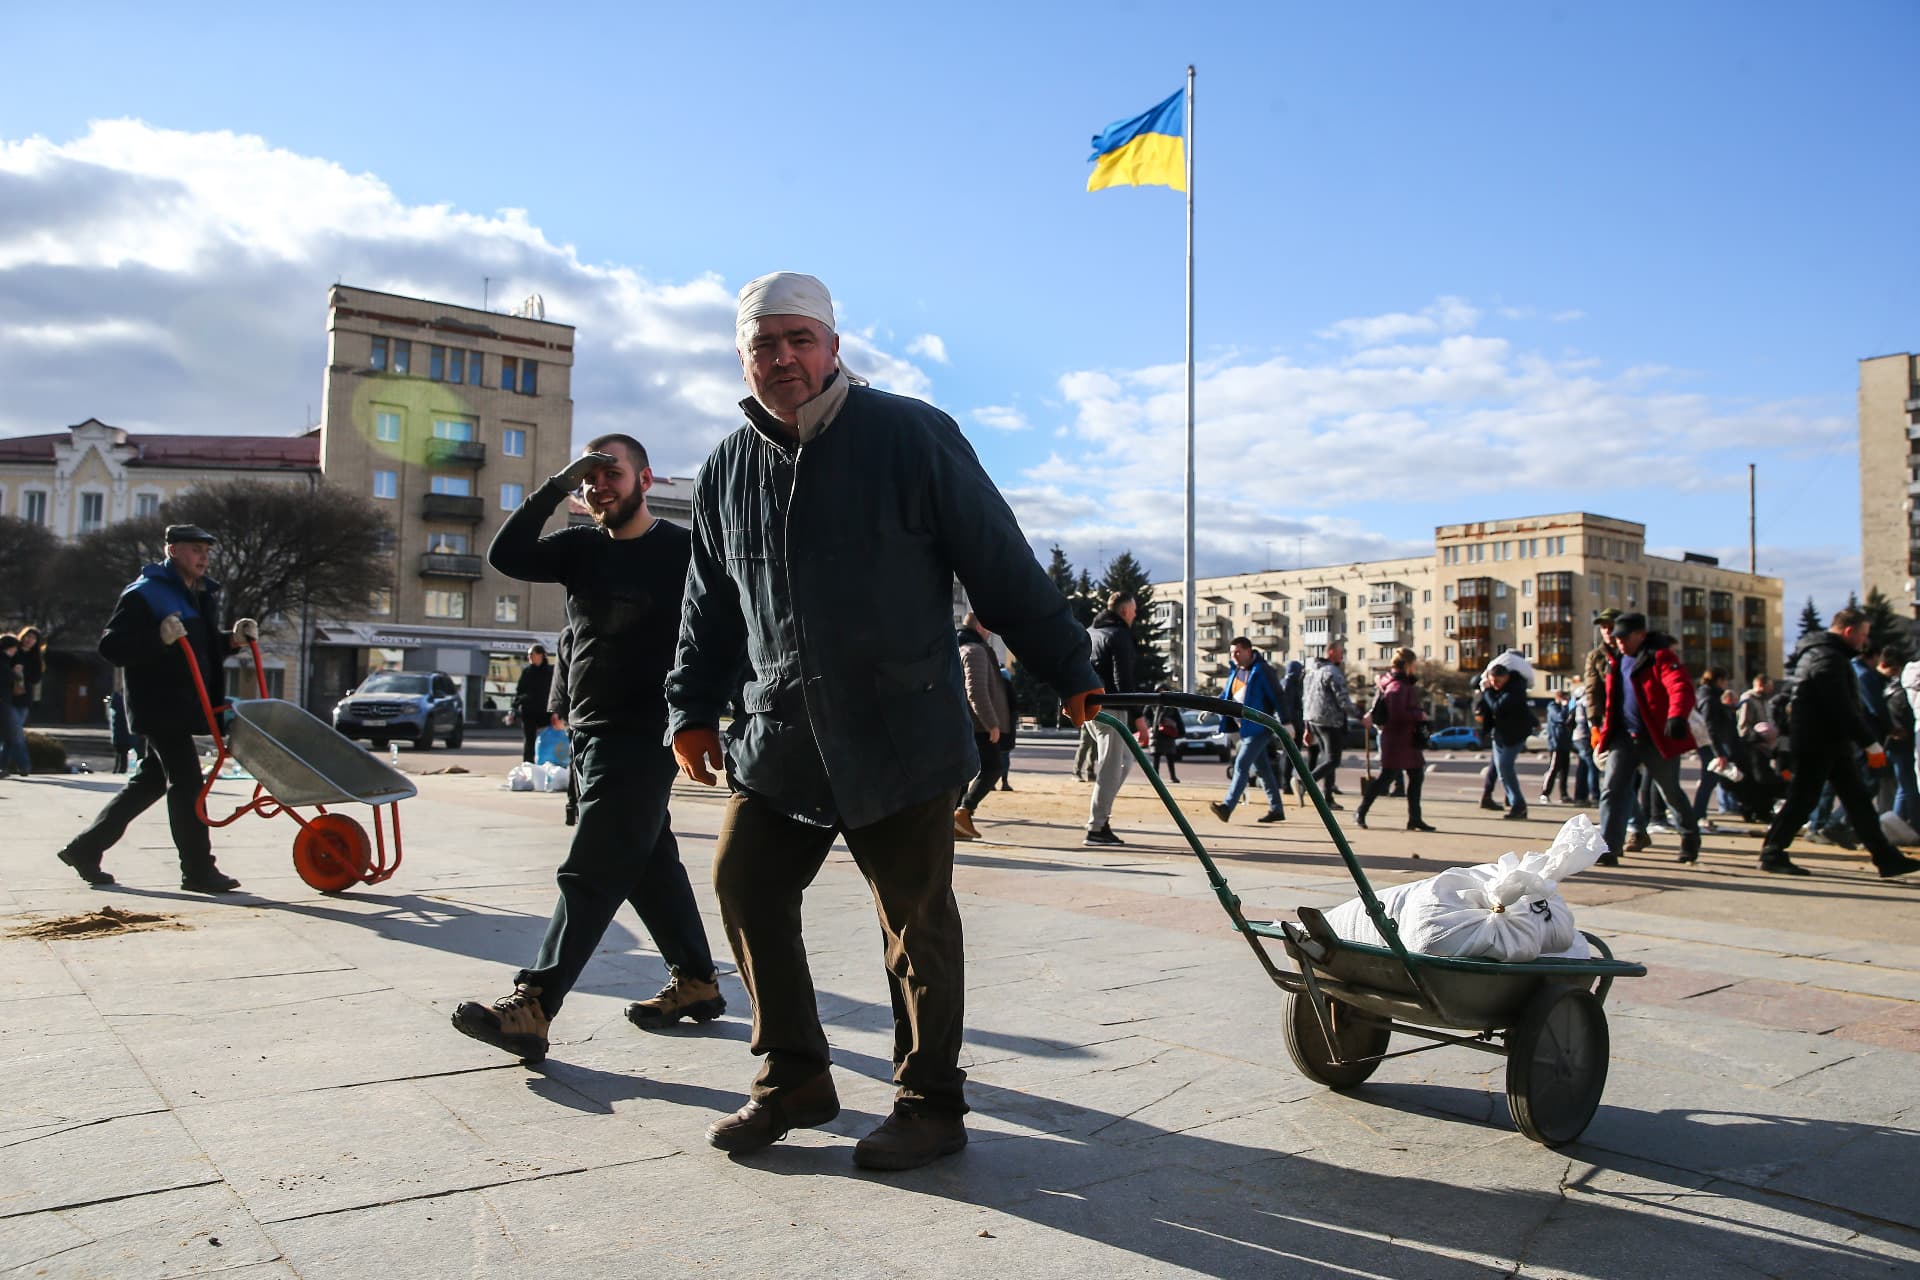  People build barricades on the streets of Zhytomyr